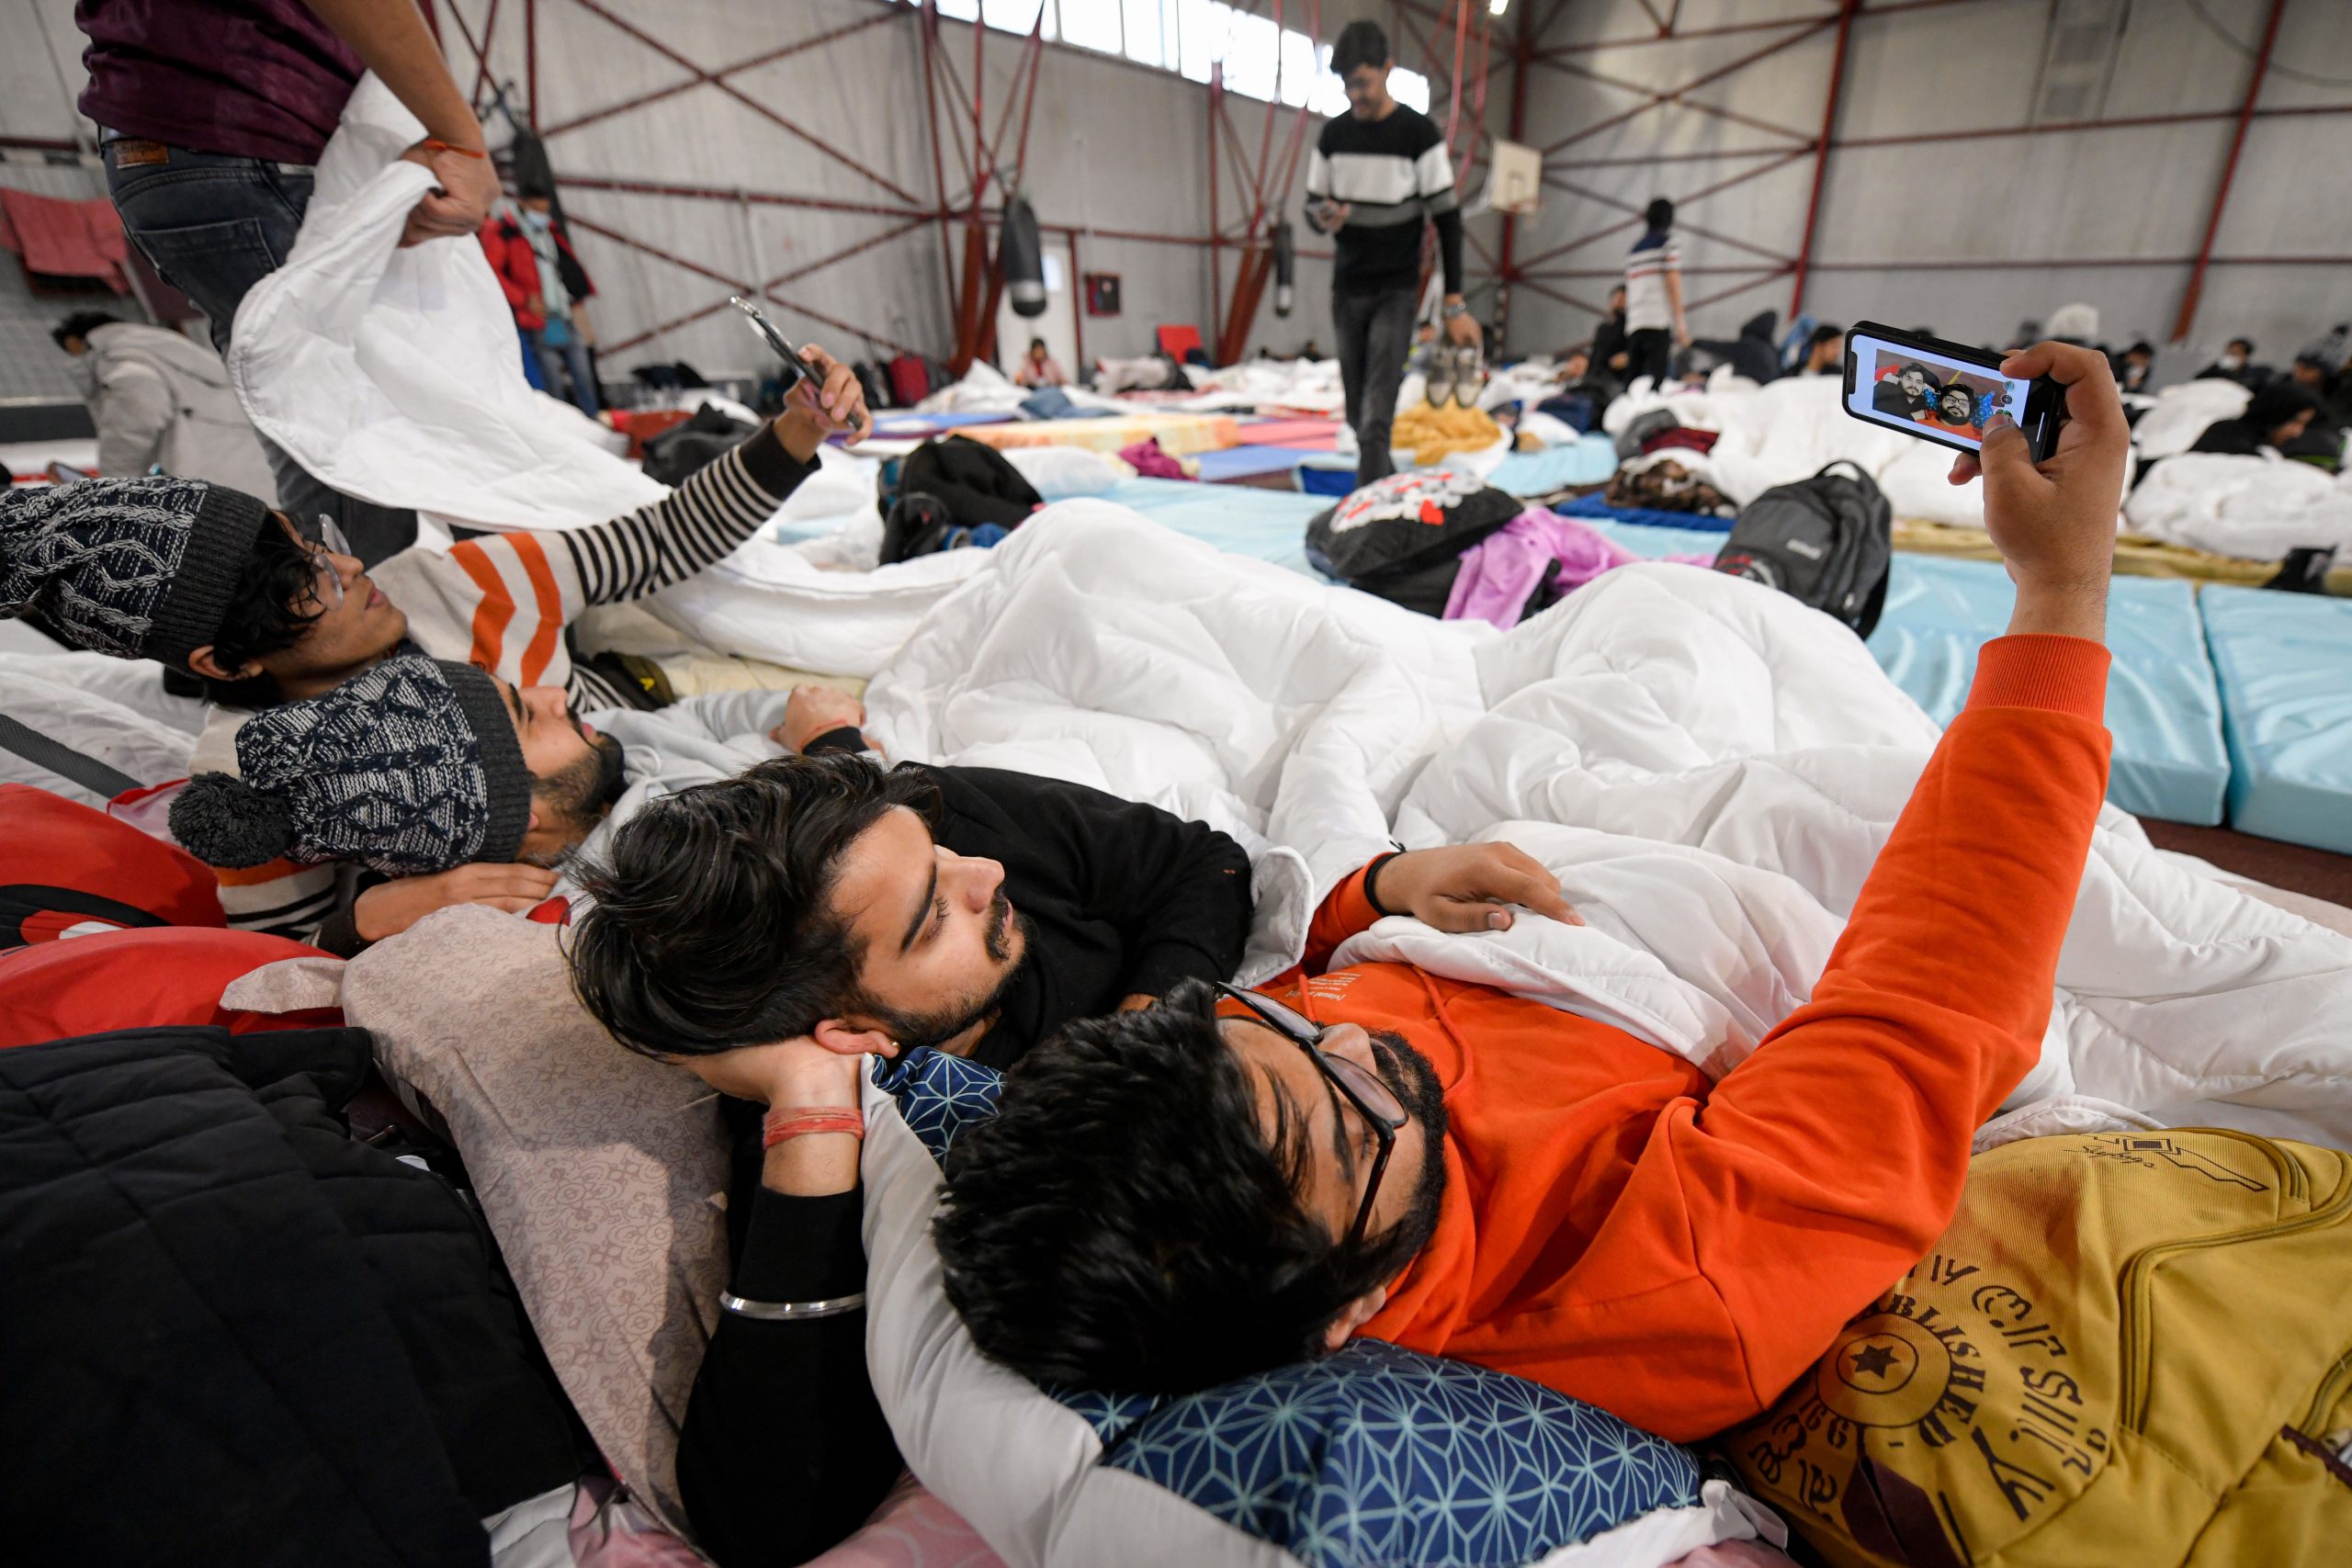 ‘Stay inside shelters’: India tells students stranded in Ukraine’s Sumy